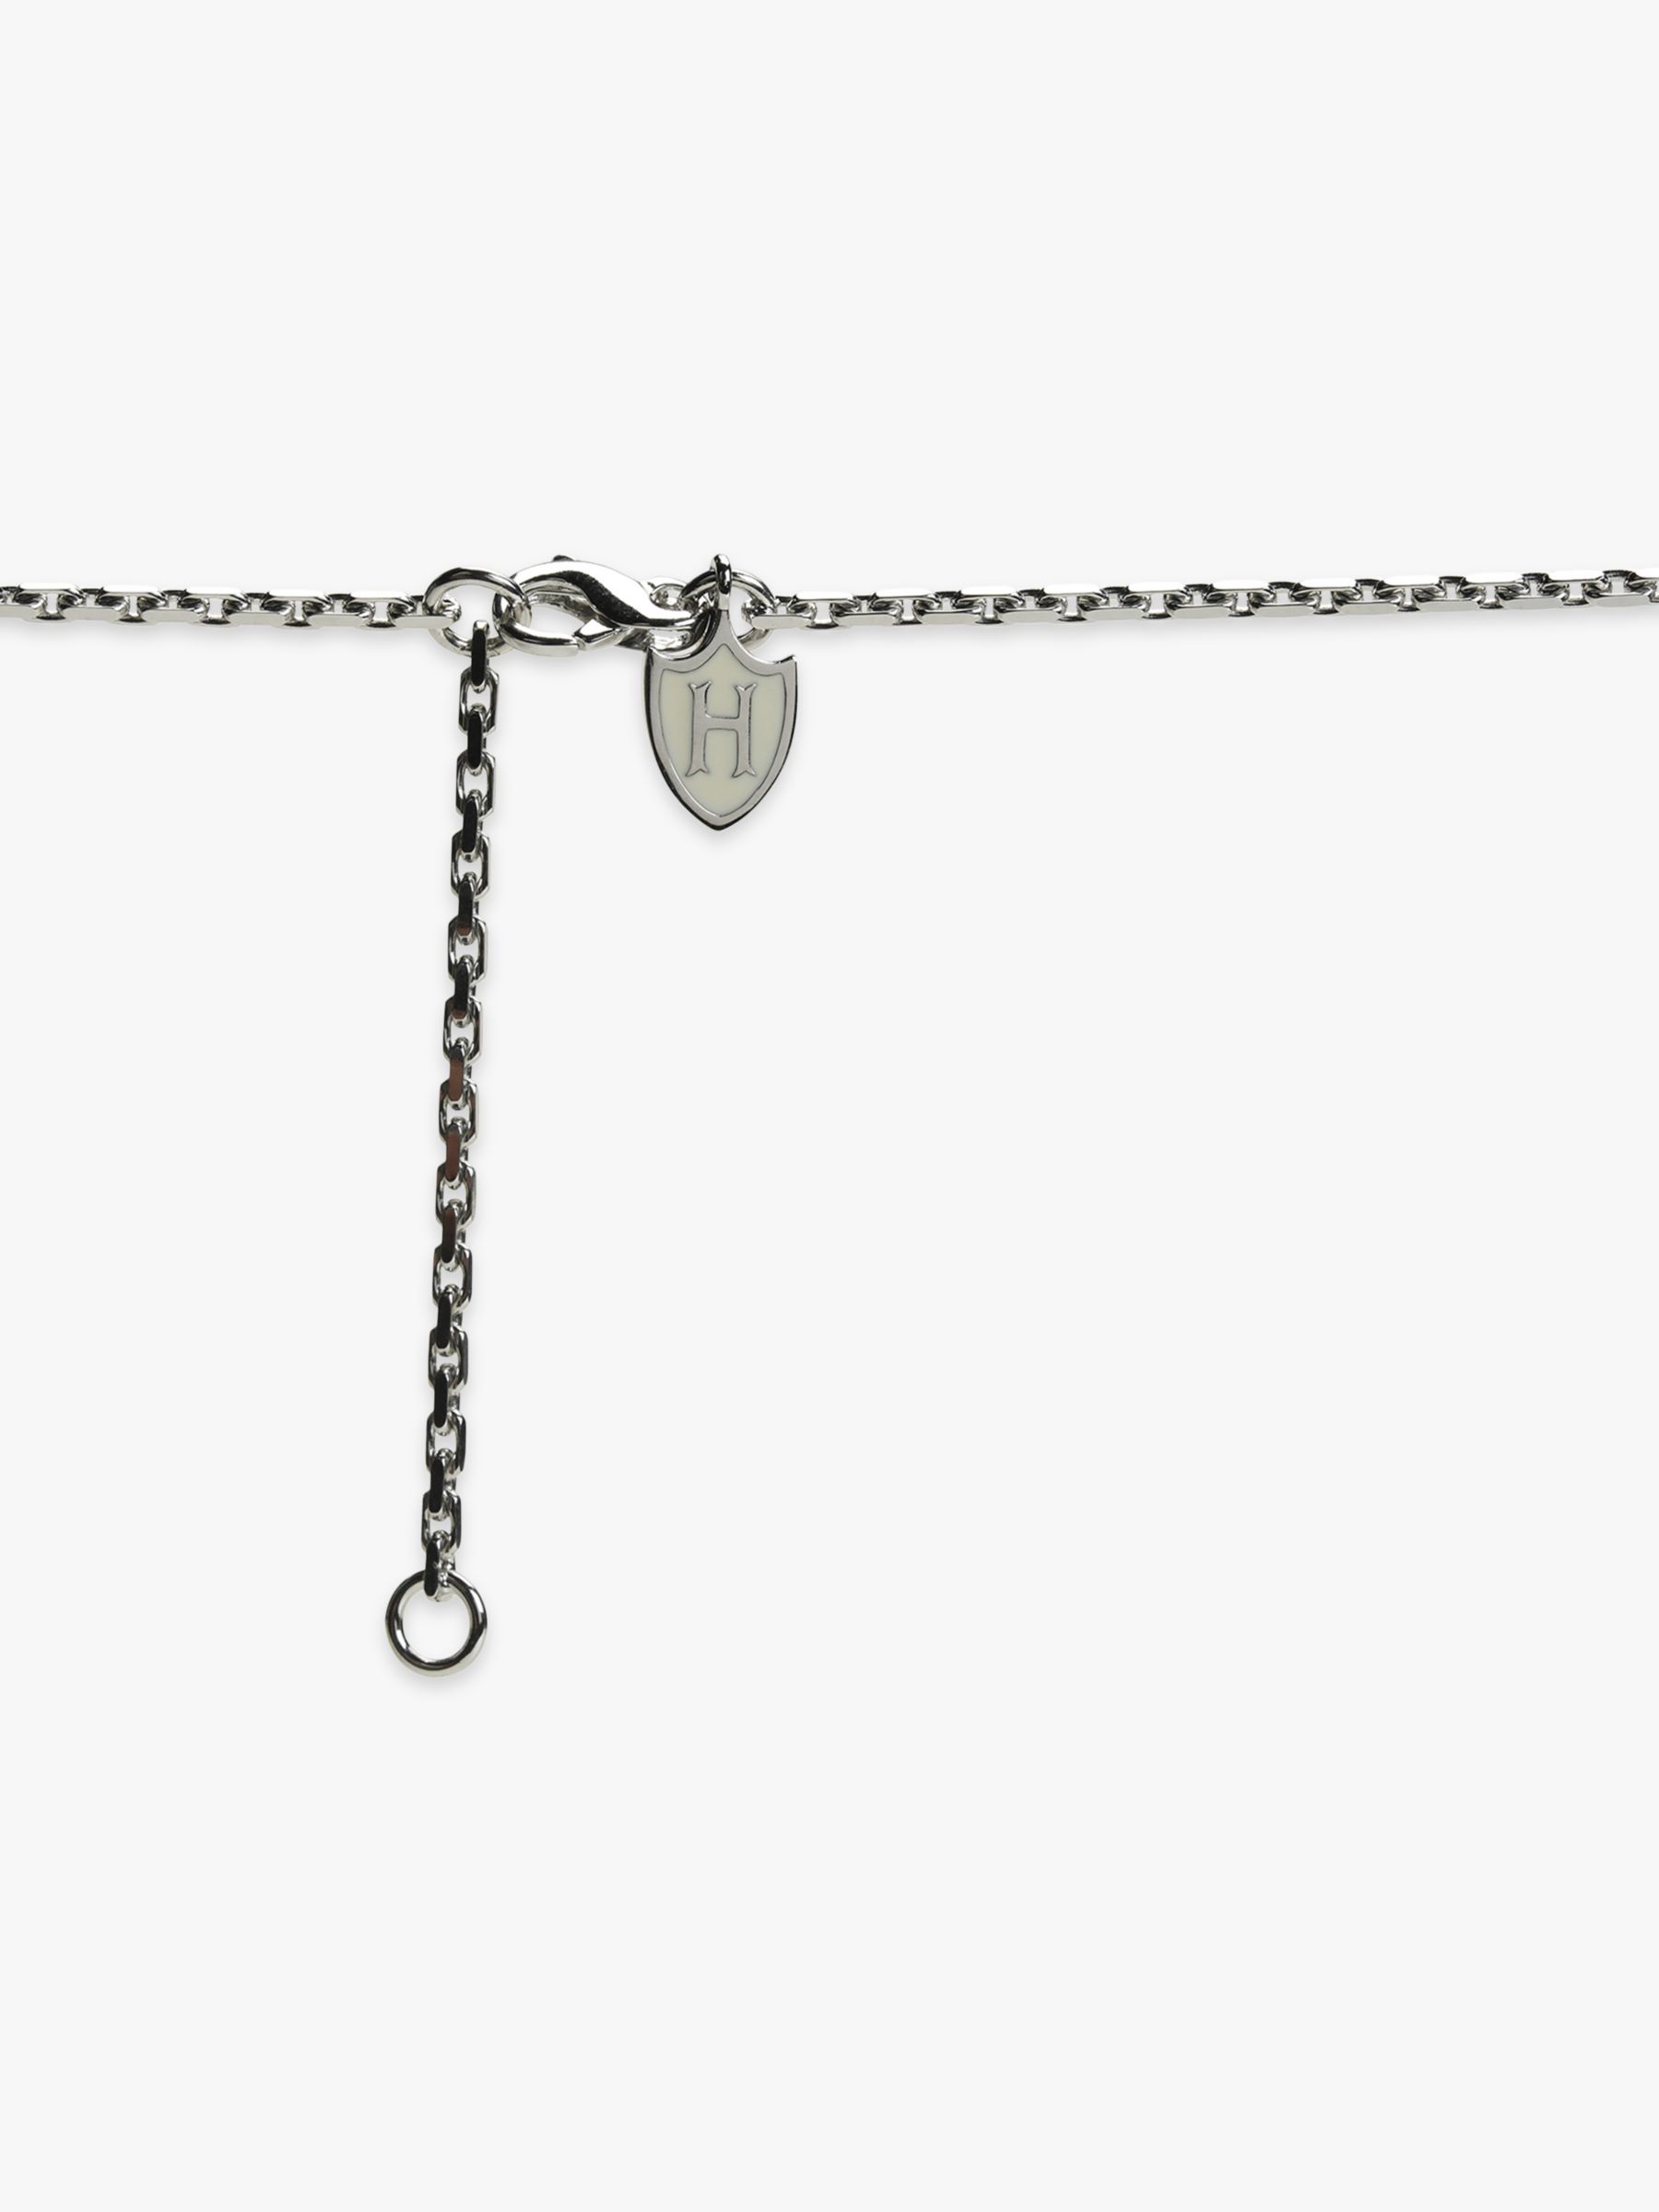 Buy Hoxton London Men's Leather Ribbed Cross Pendant Necklace, Silver Online at johnlewis.com